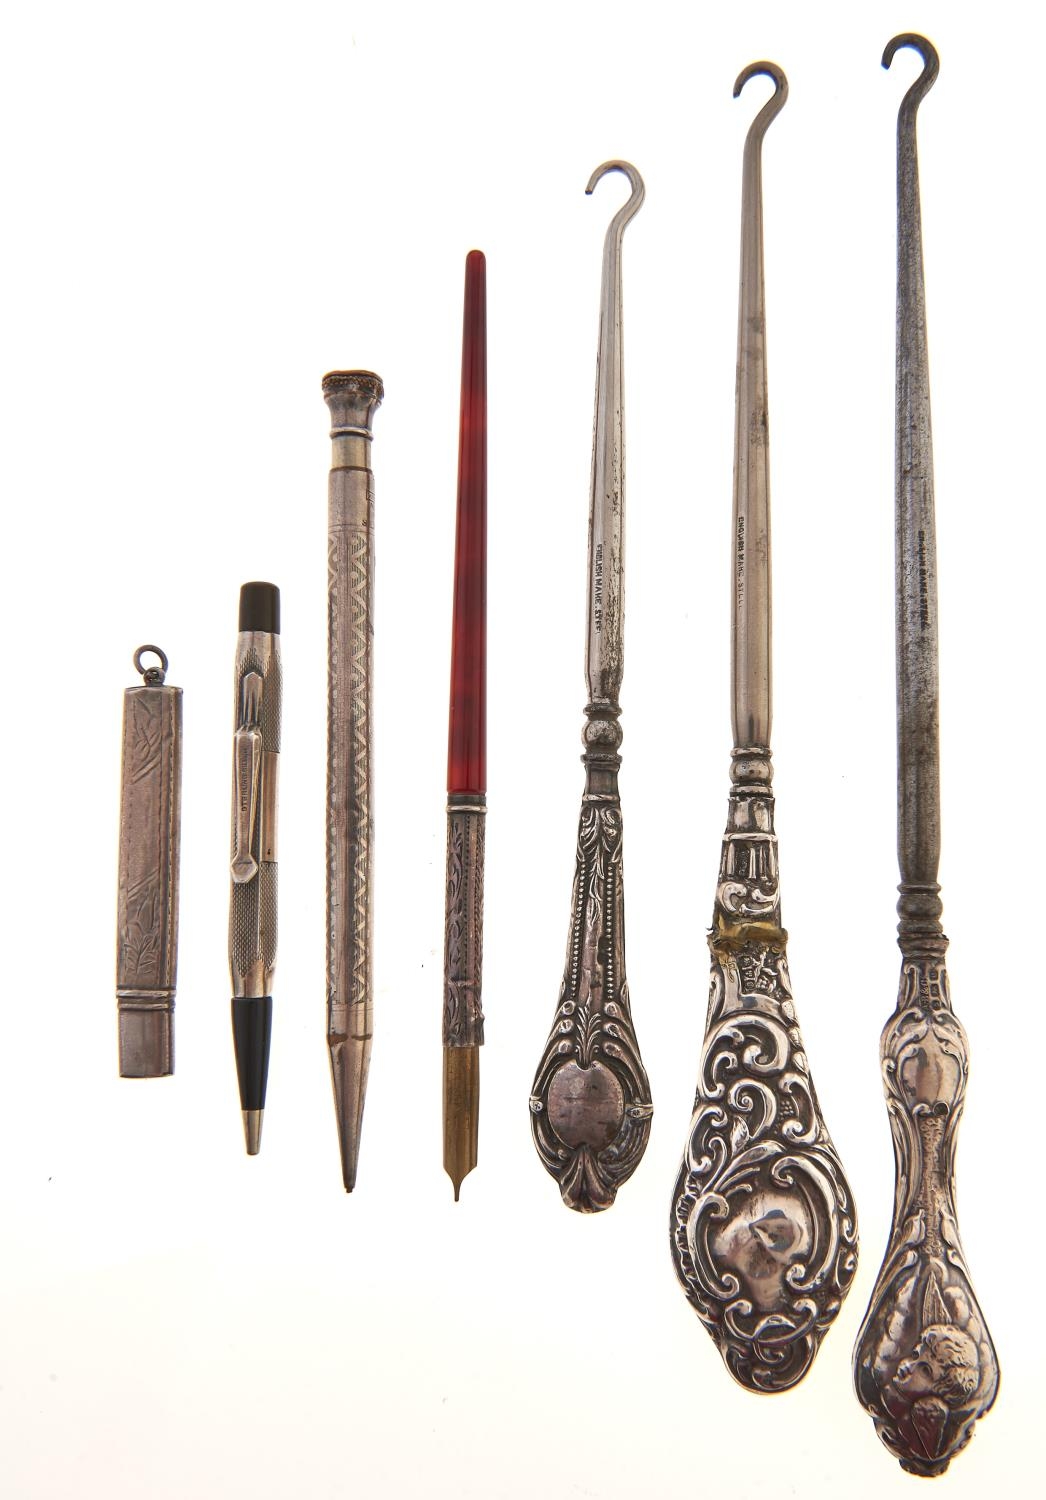 Three silver handled button hooks, various lengths, makers and dates, c1900, two pencils, the sheath